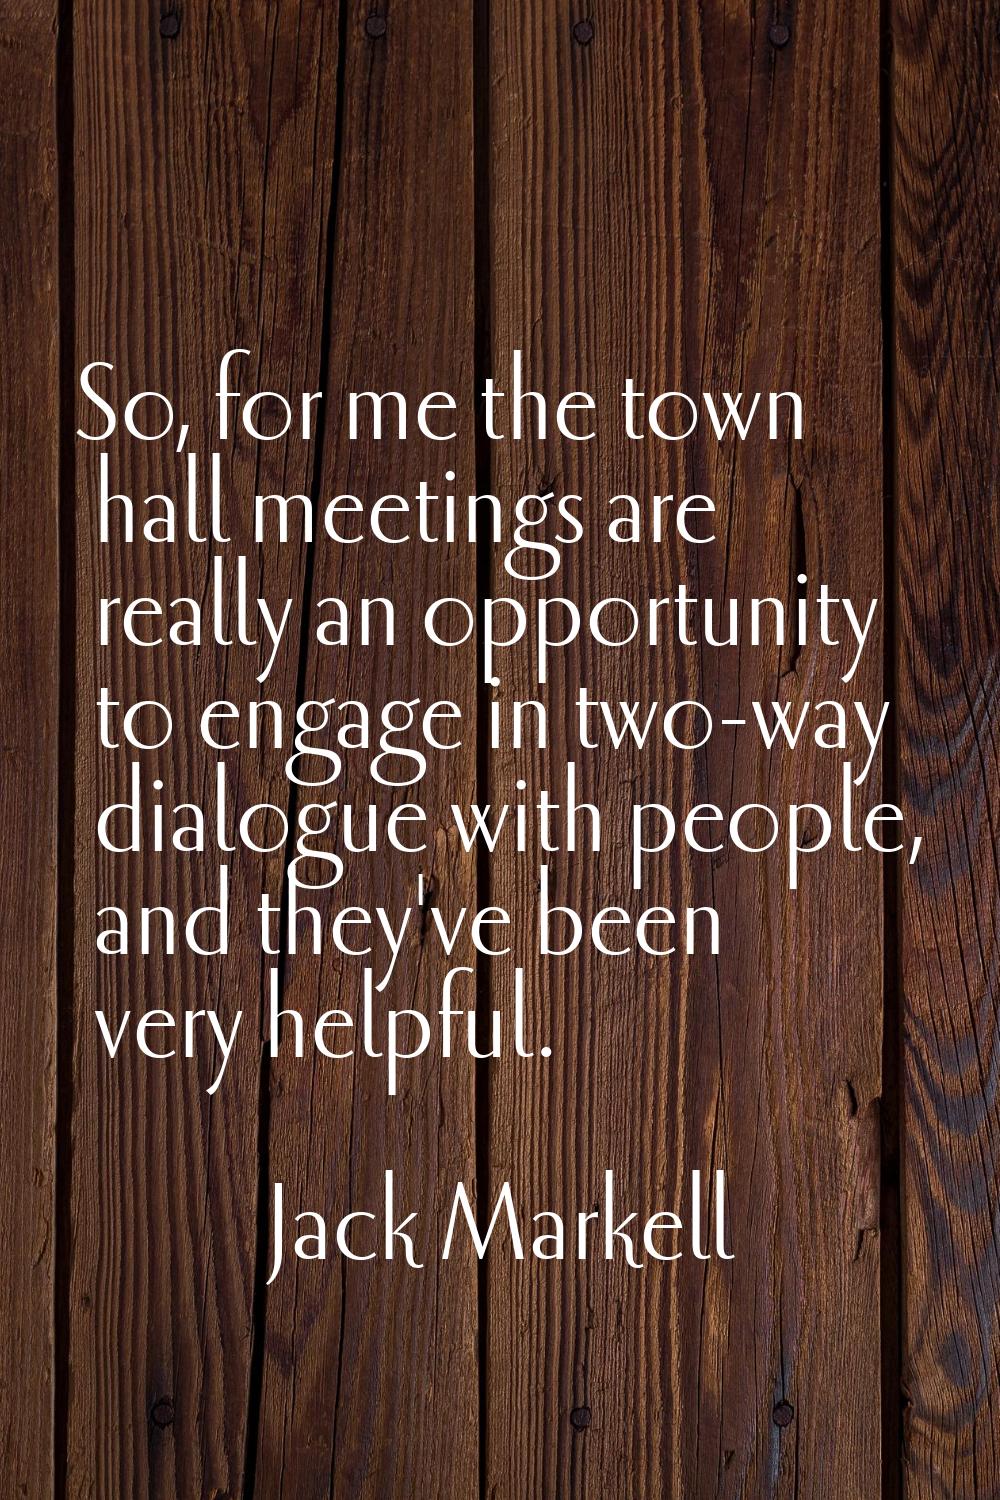 So, for me the town hall meetings are really an opportunity to engage in two-way dialogue with peop